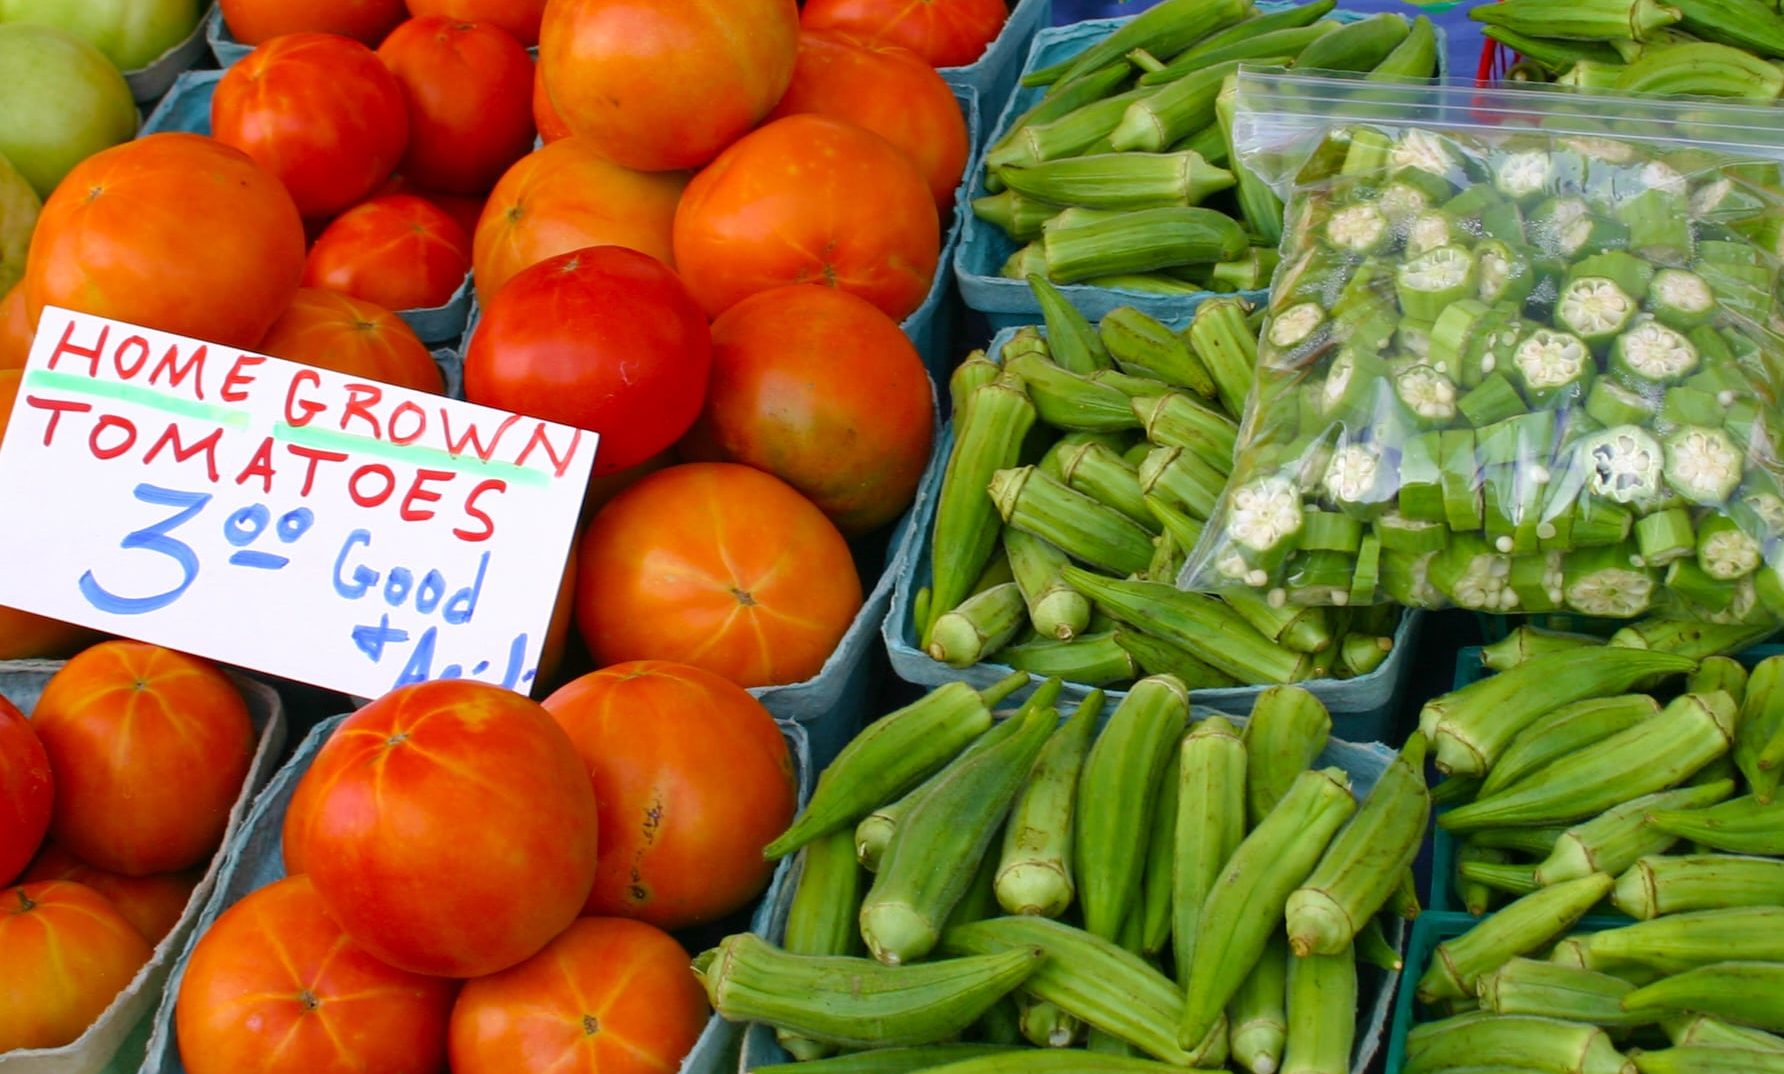 fresh tomatoes and okra in baskets for sale at a fresh vegetable stand